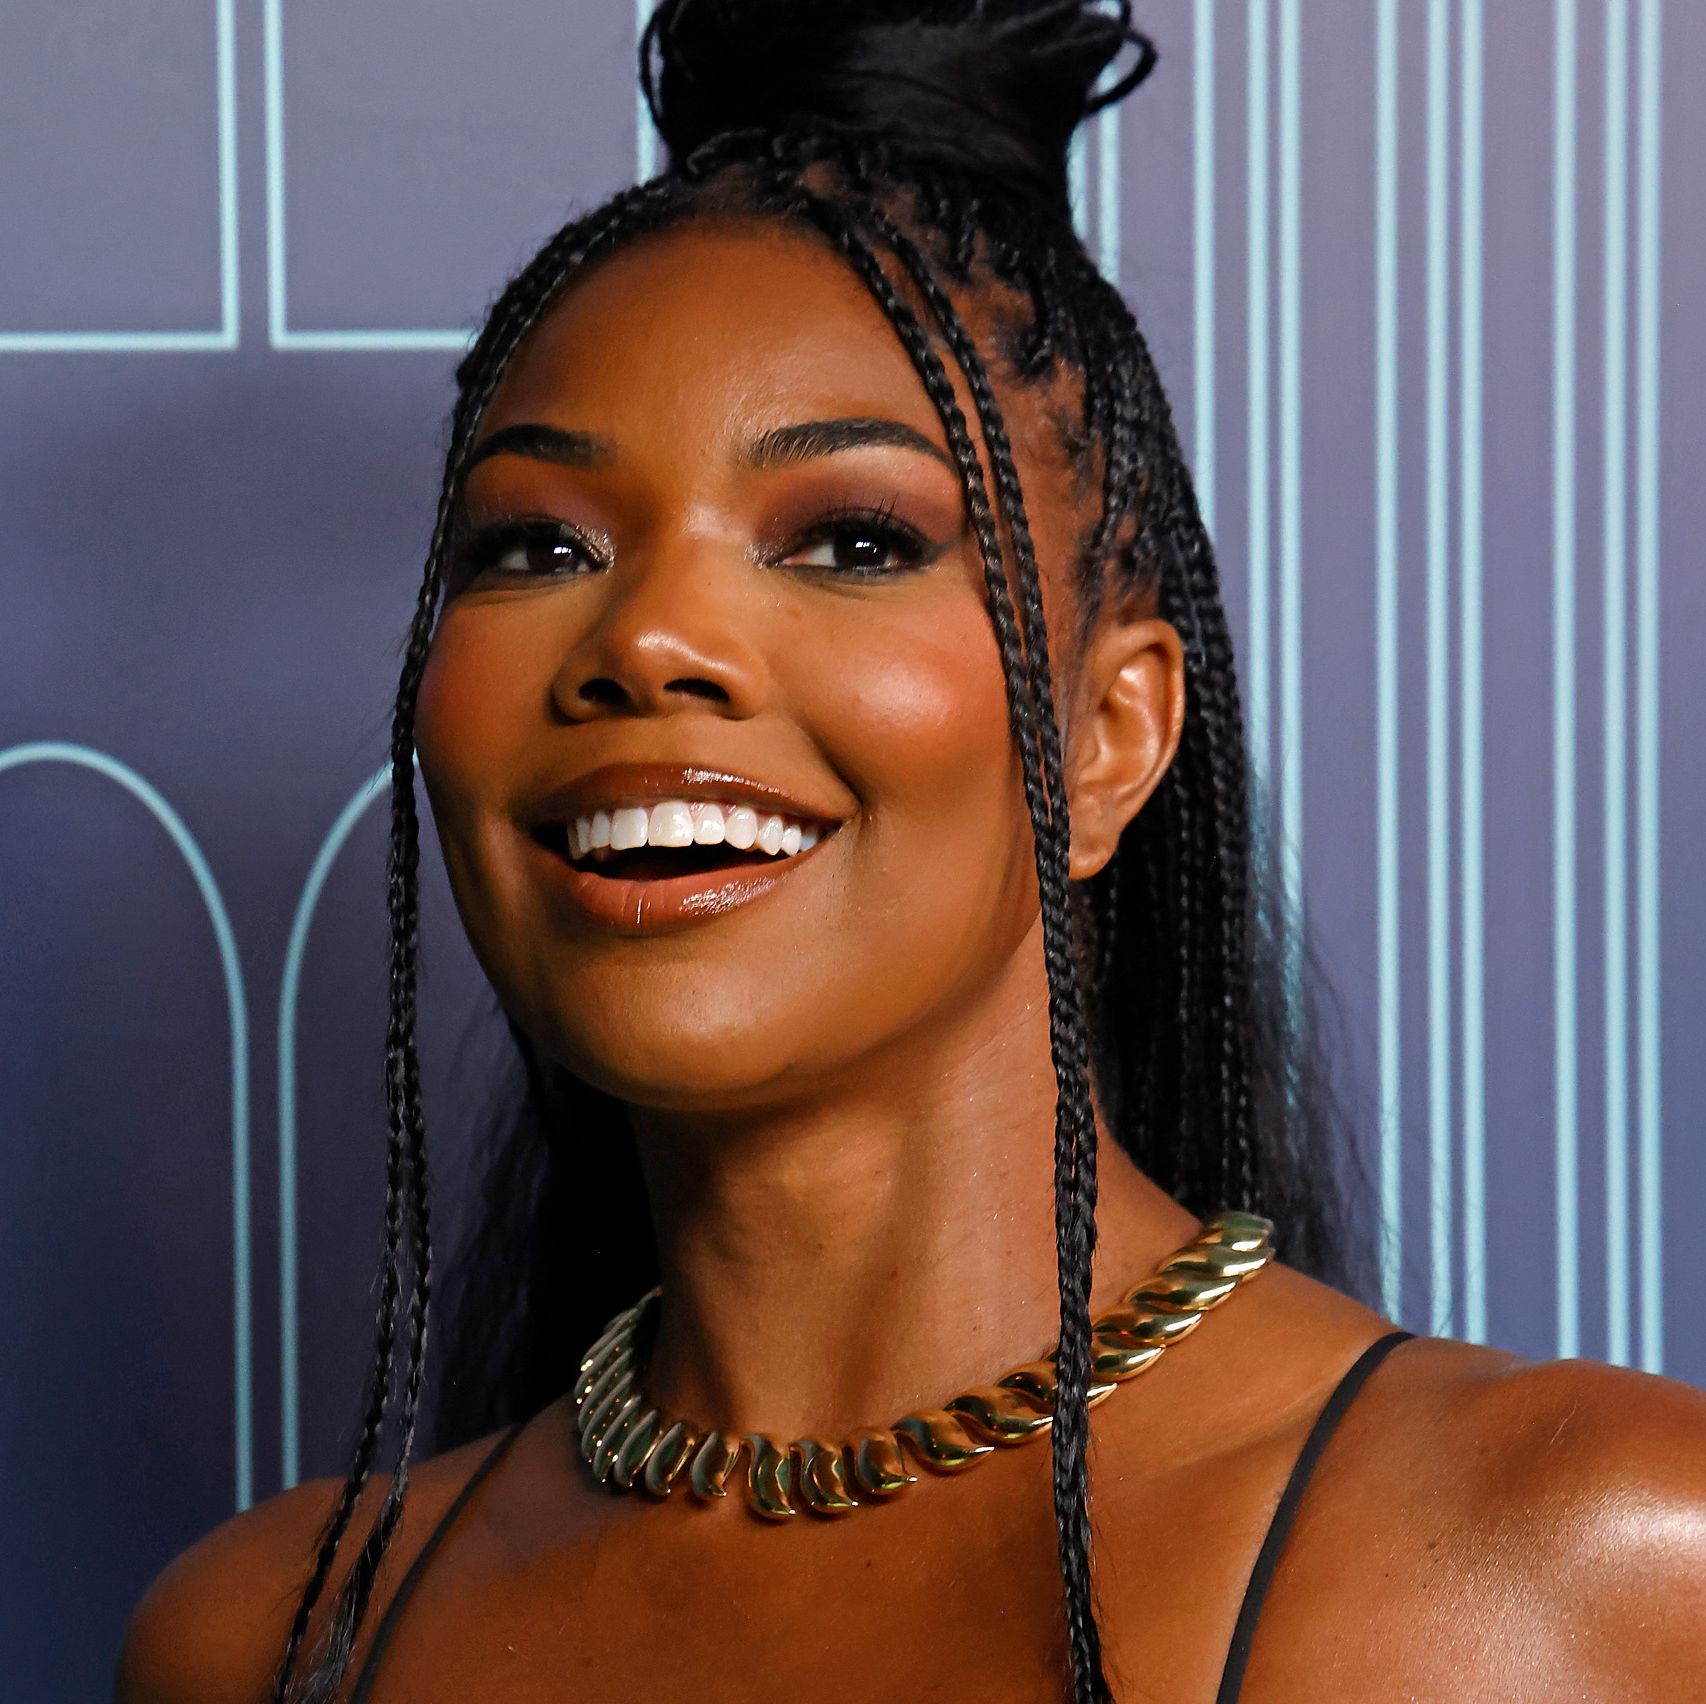 I'm Losing It Over Gabrielle Union's Perky Booty in New IG Pics